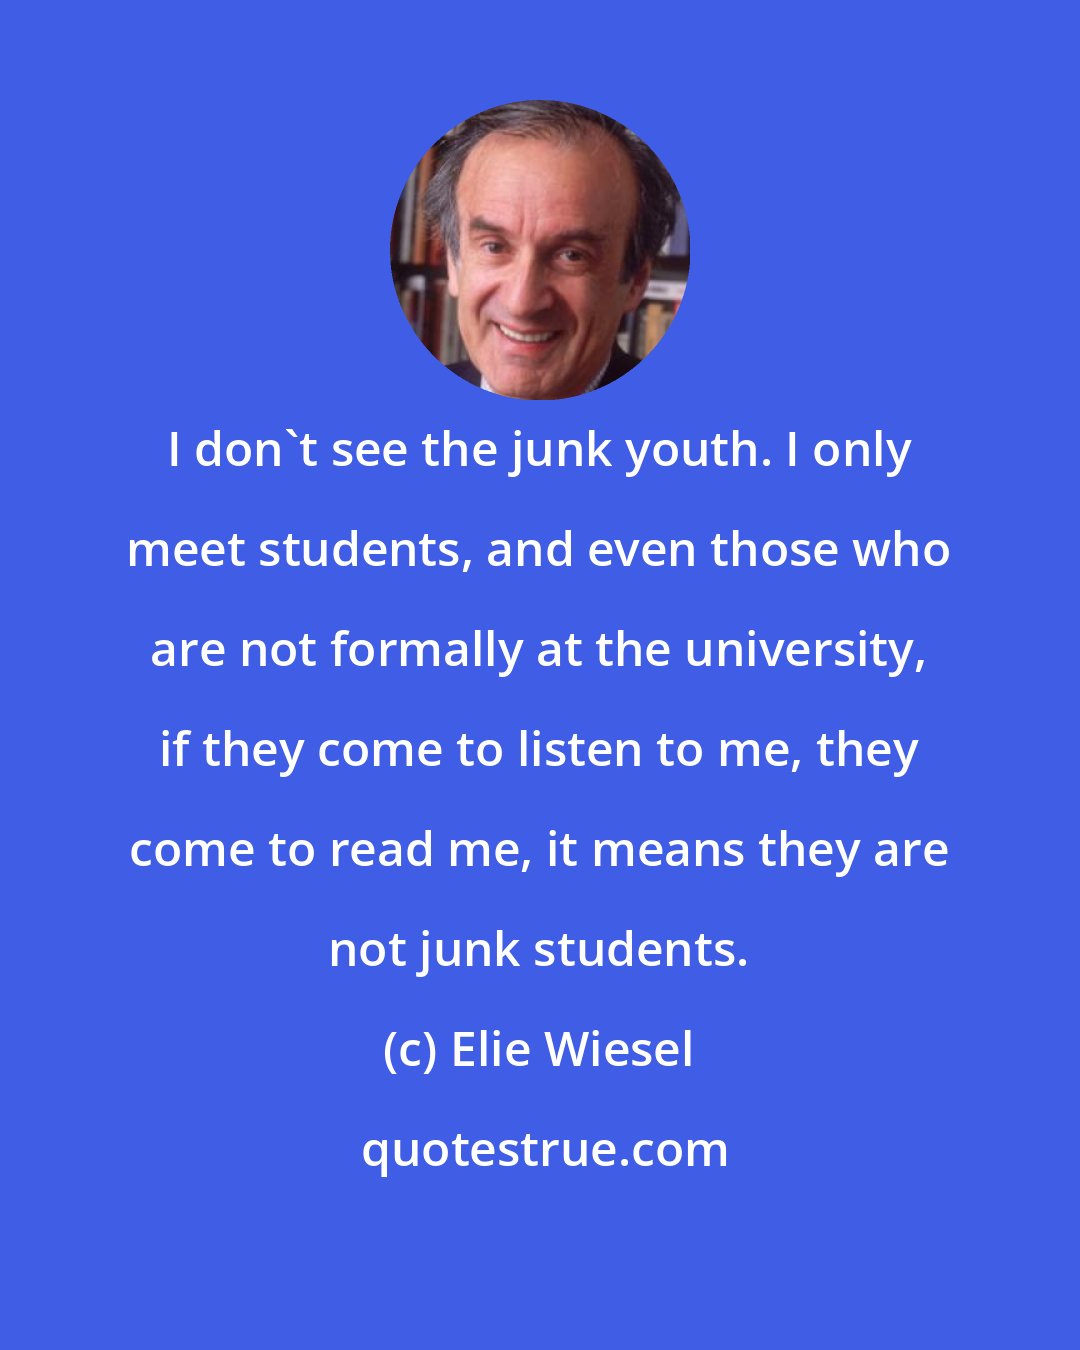 Elie Wiesel: I don't see the junk youth. I only meet students, and even those who are not formally at the university, if they come to listen to me, they come to read me, it means they are not junk students.